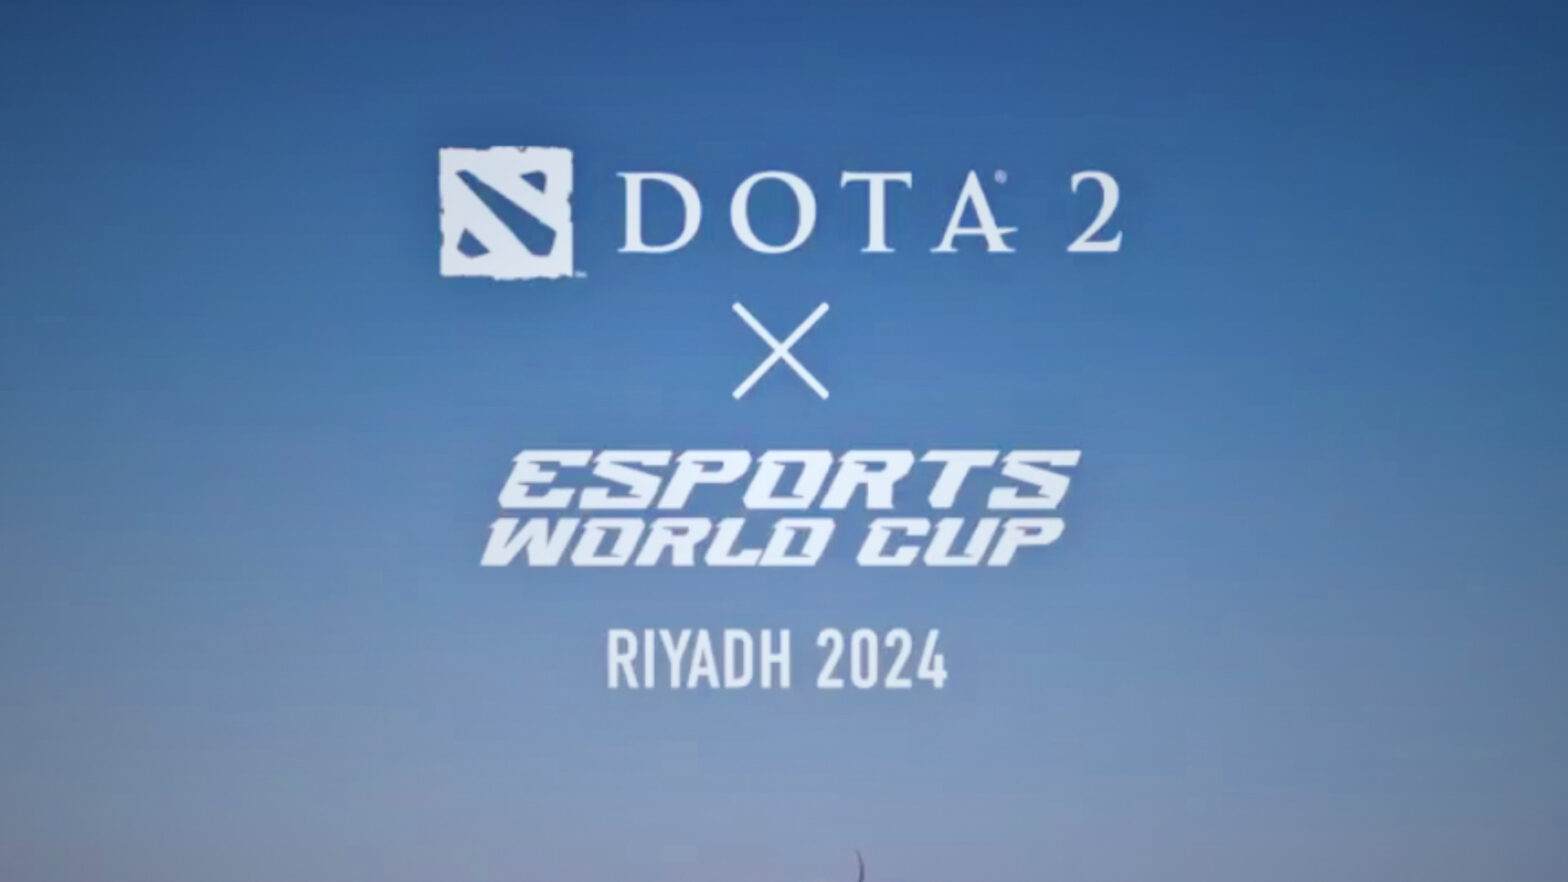 Dota 2 Joins the Esteemed Ranks at the Esports World Cup in Riyadh